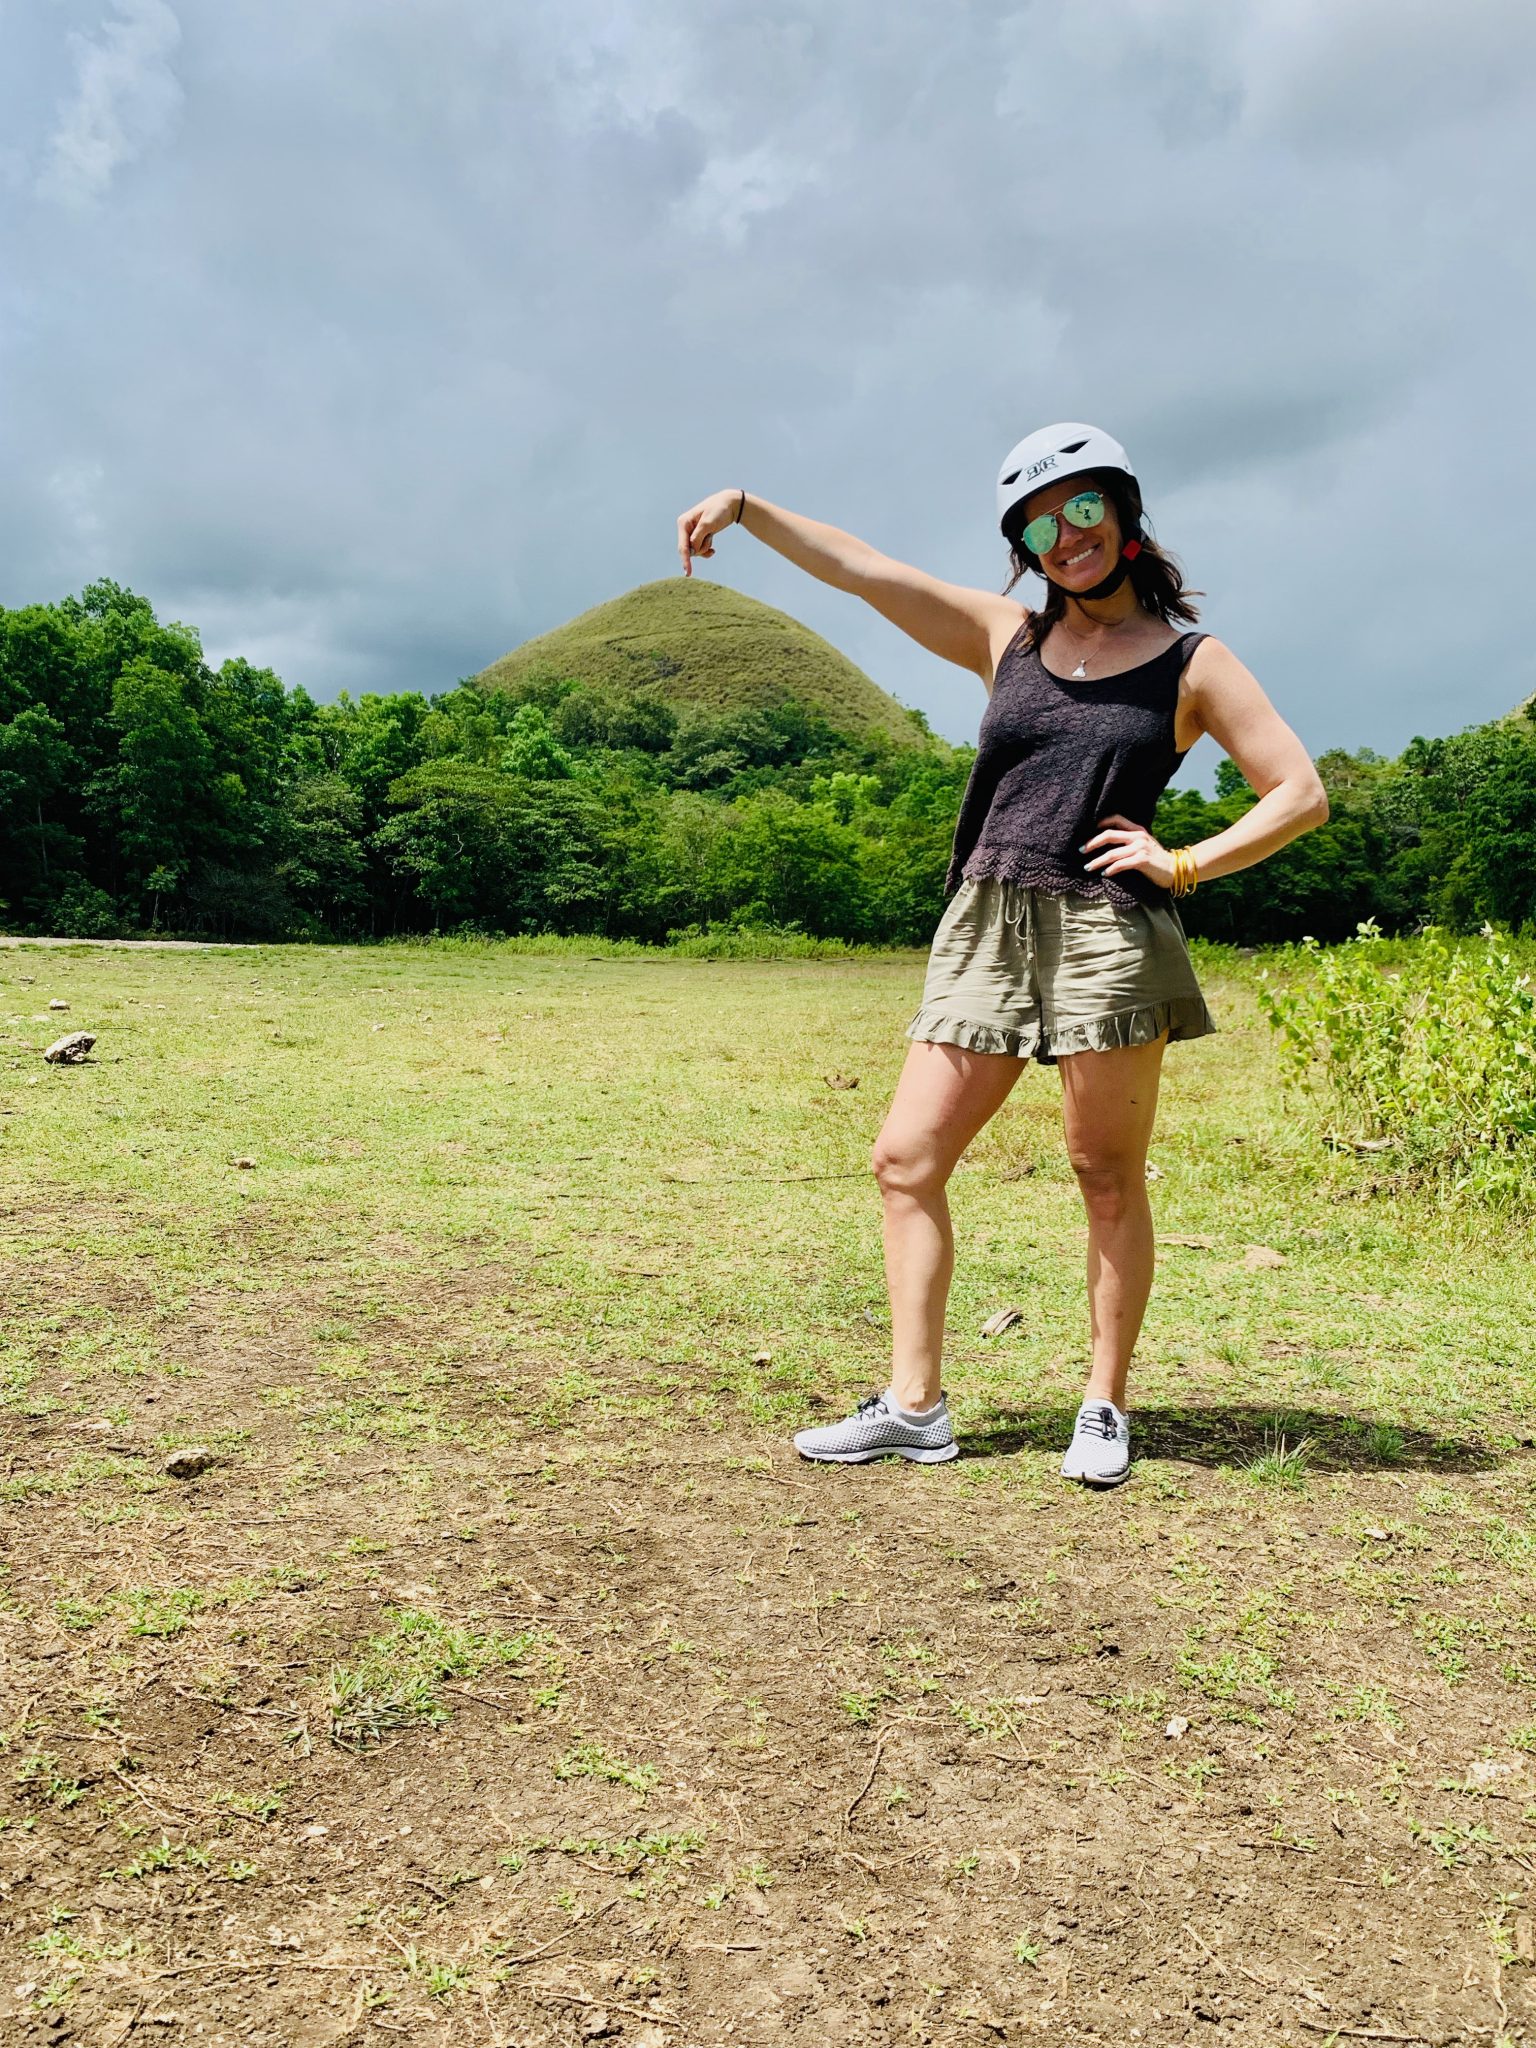 A typical tourist shot at the Chocolate Hills in Bohol.